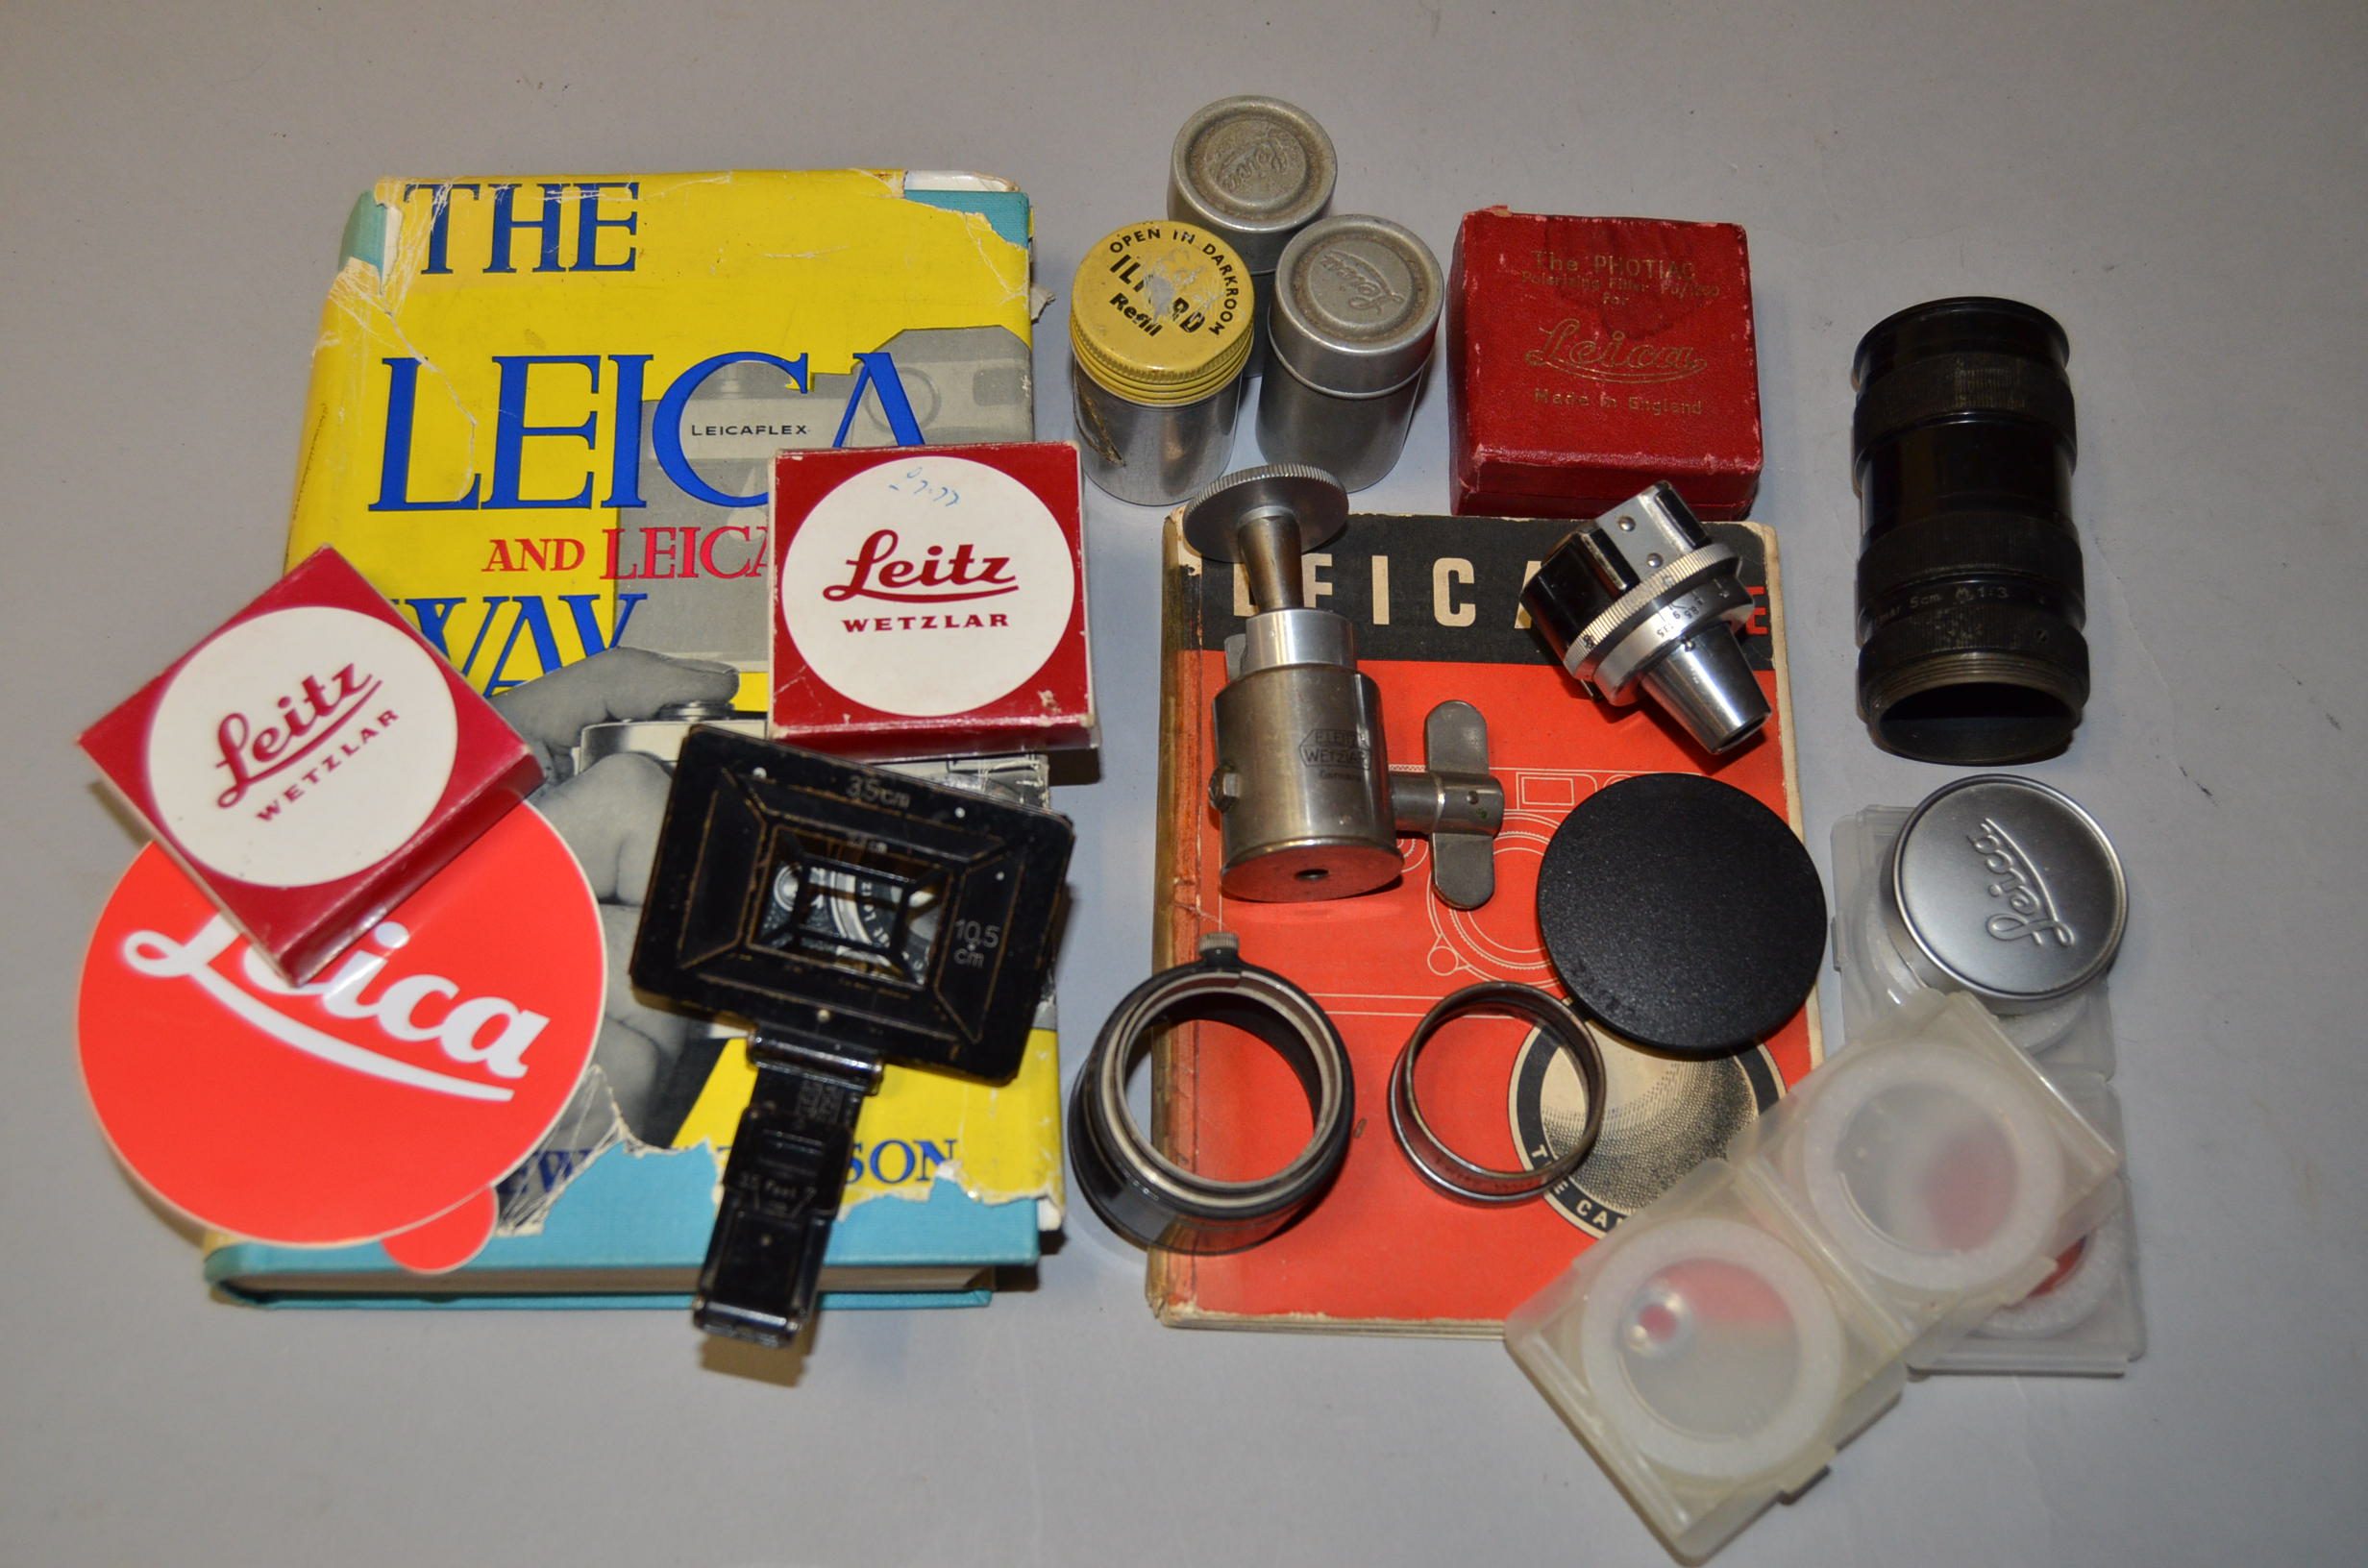 Leica Literature and Accessories, including The Leica and Leicaflex Way (1966), Leica Guide (